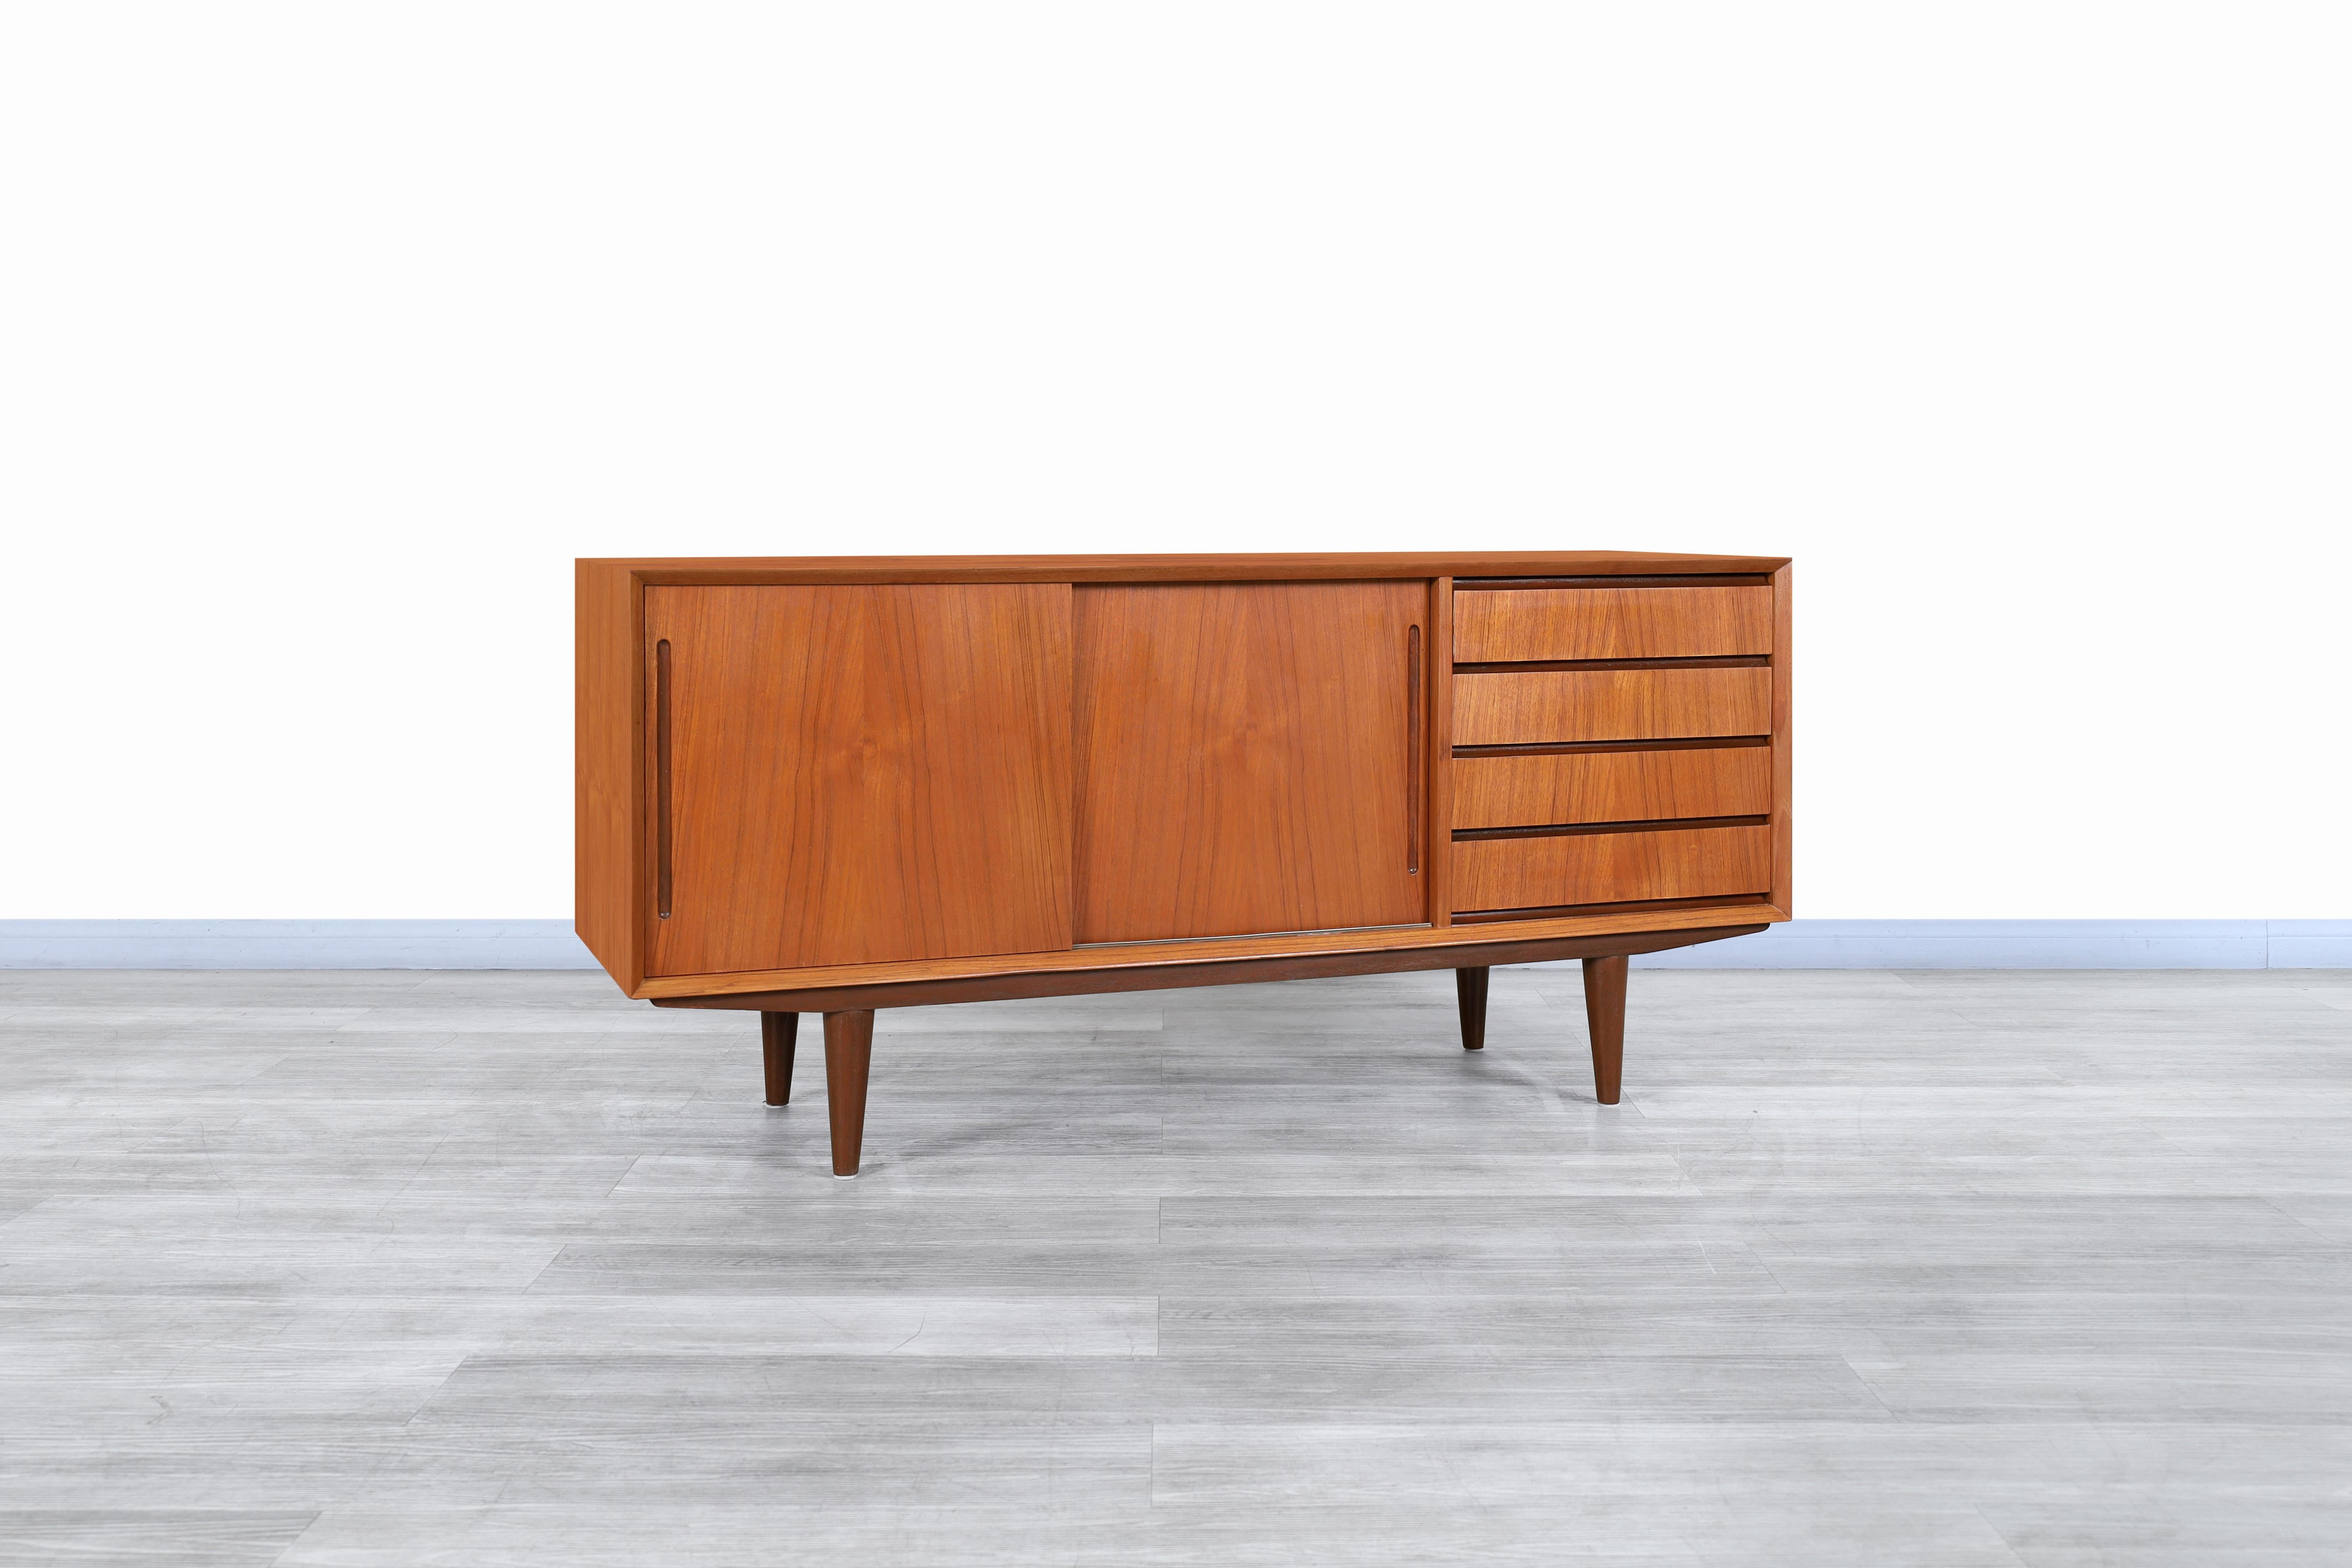 Wonderful Danish modern teak credenza manufactured in Denmark, circa 1960s. This credenza has been constructed from the highest quality teak wood and features a functional and elegant design representative of the Scandinavian era. Features four